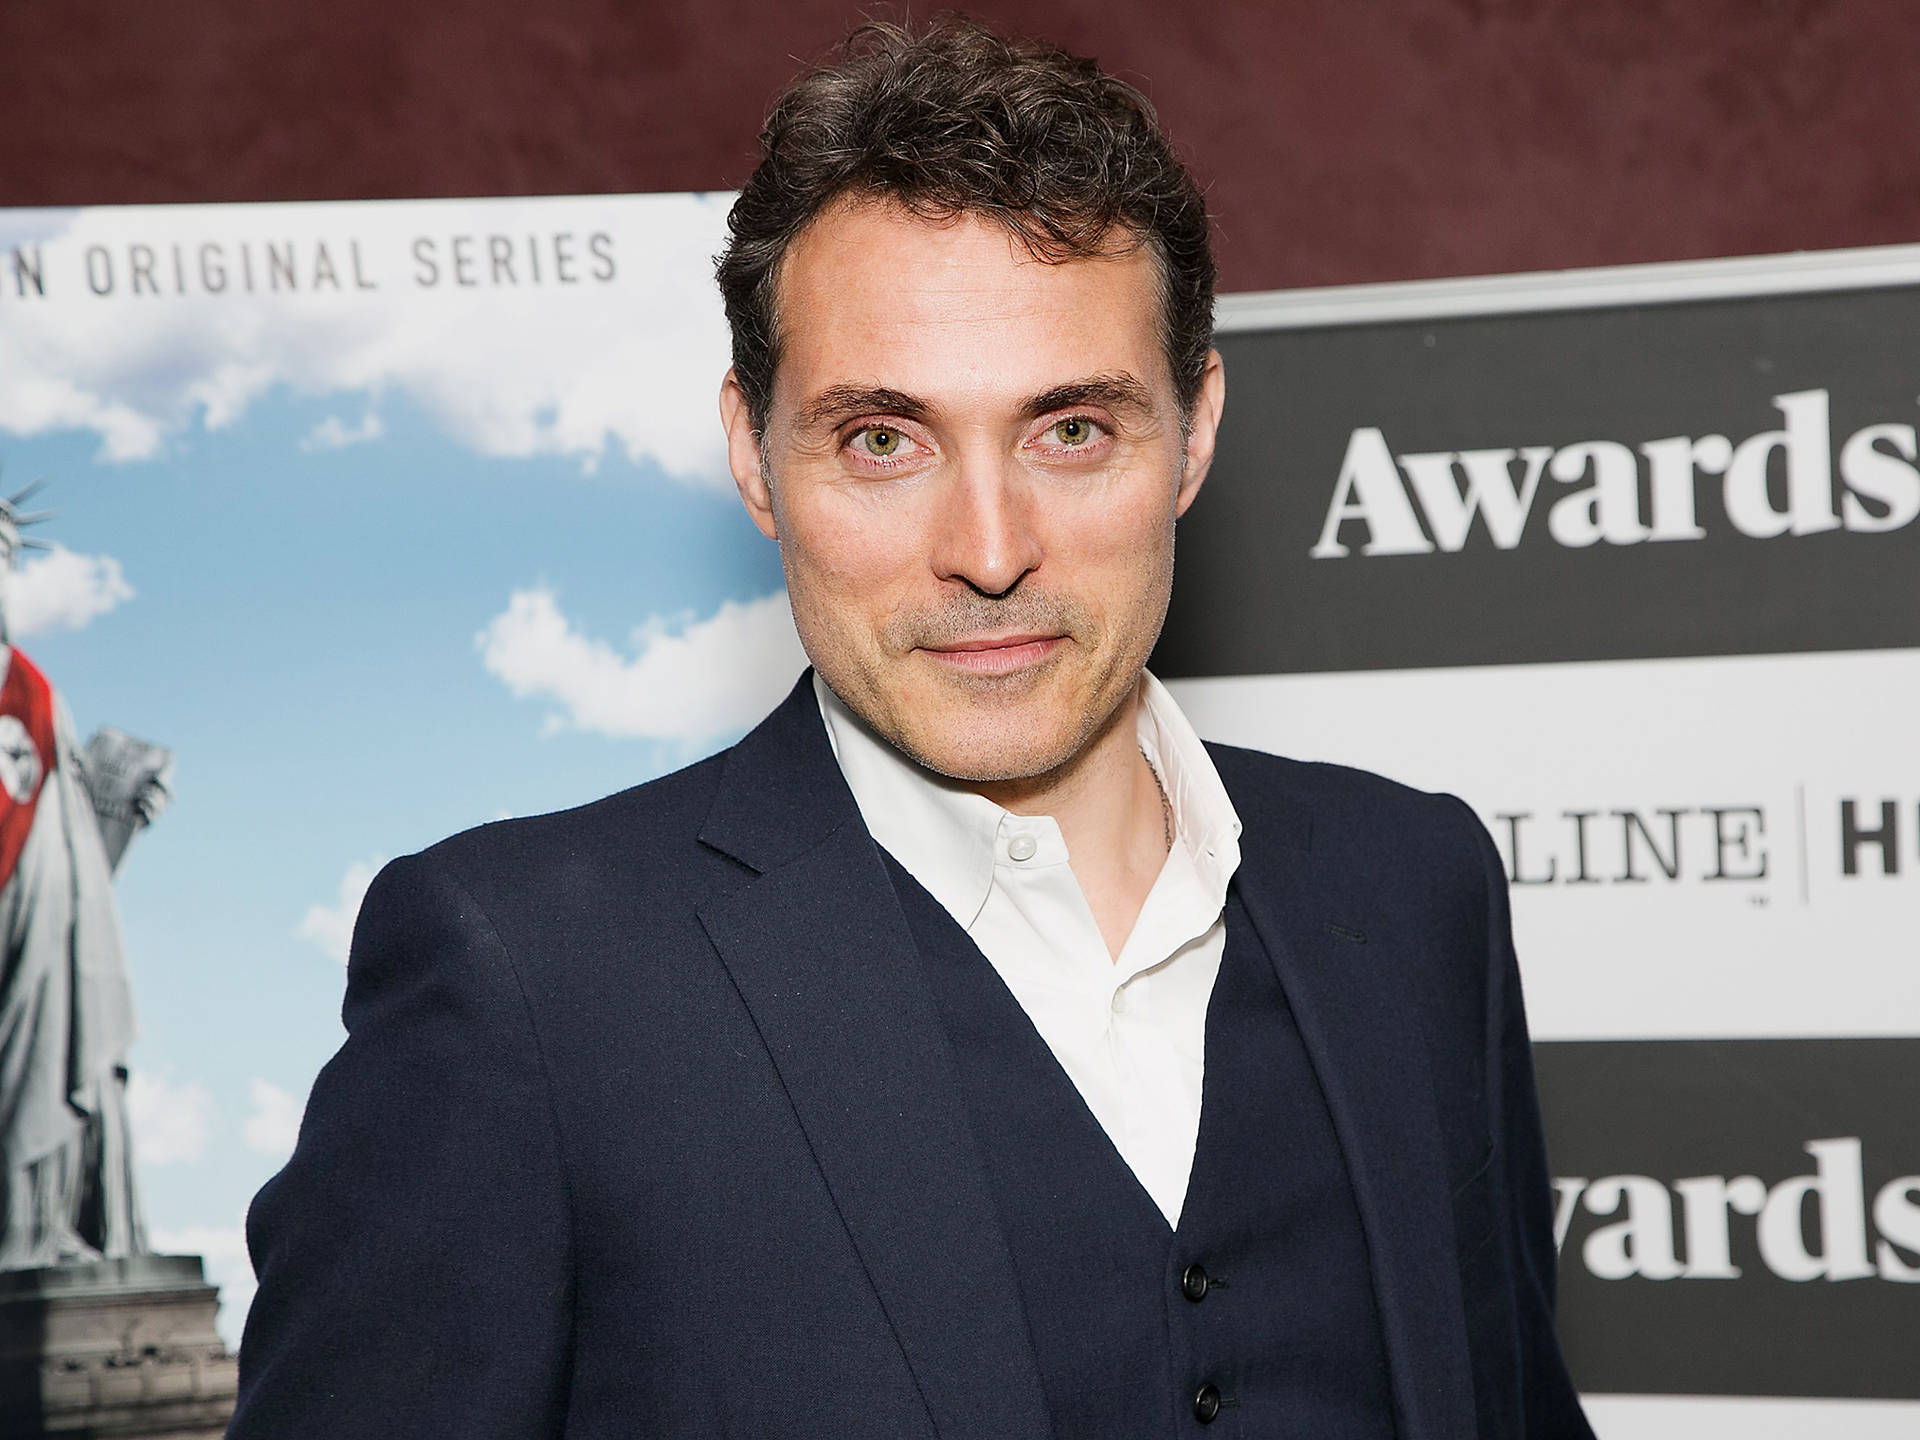 Award Winning Actor Rufus Sewell in a Stylish Suit Wallpaper